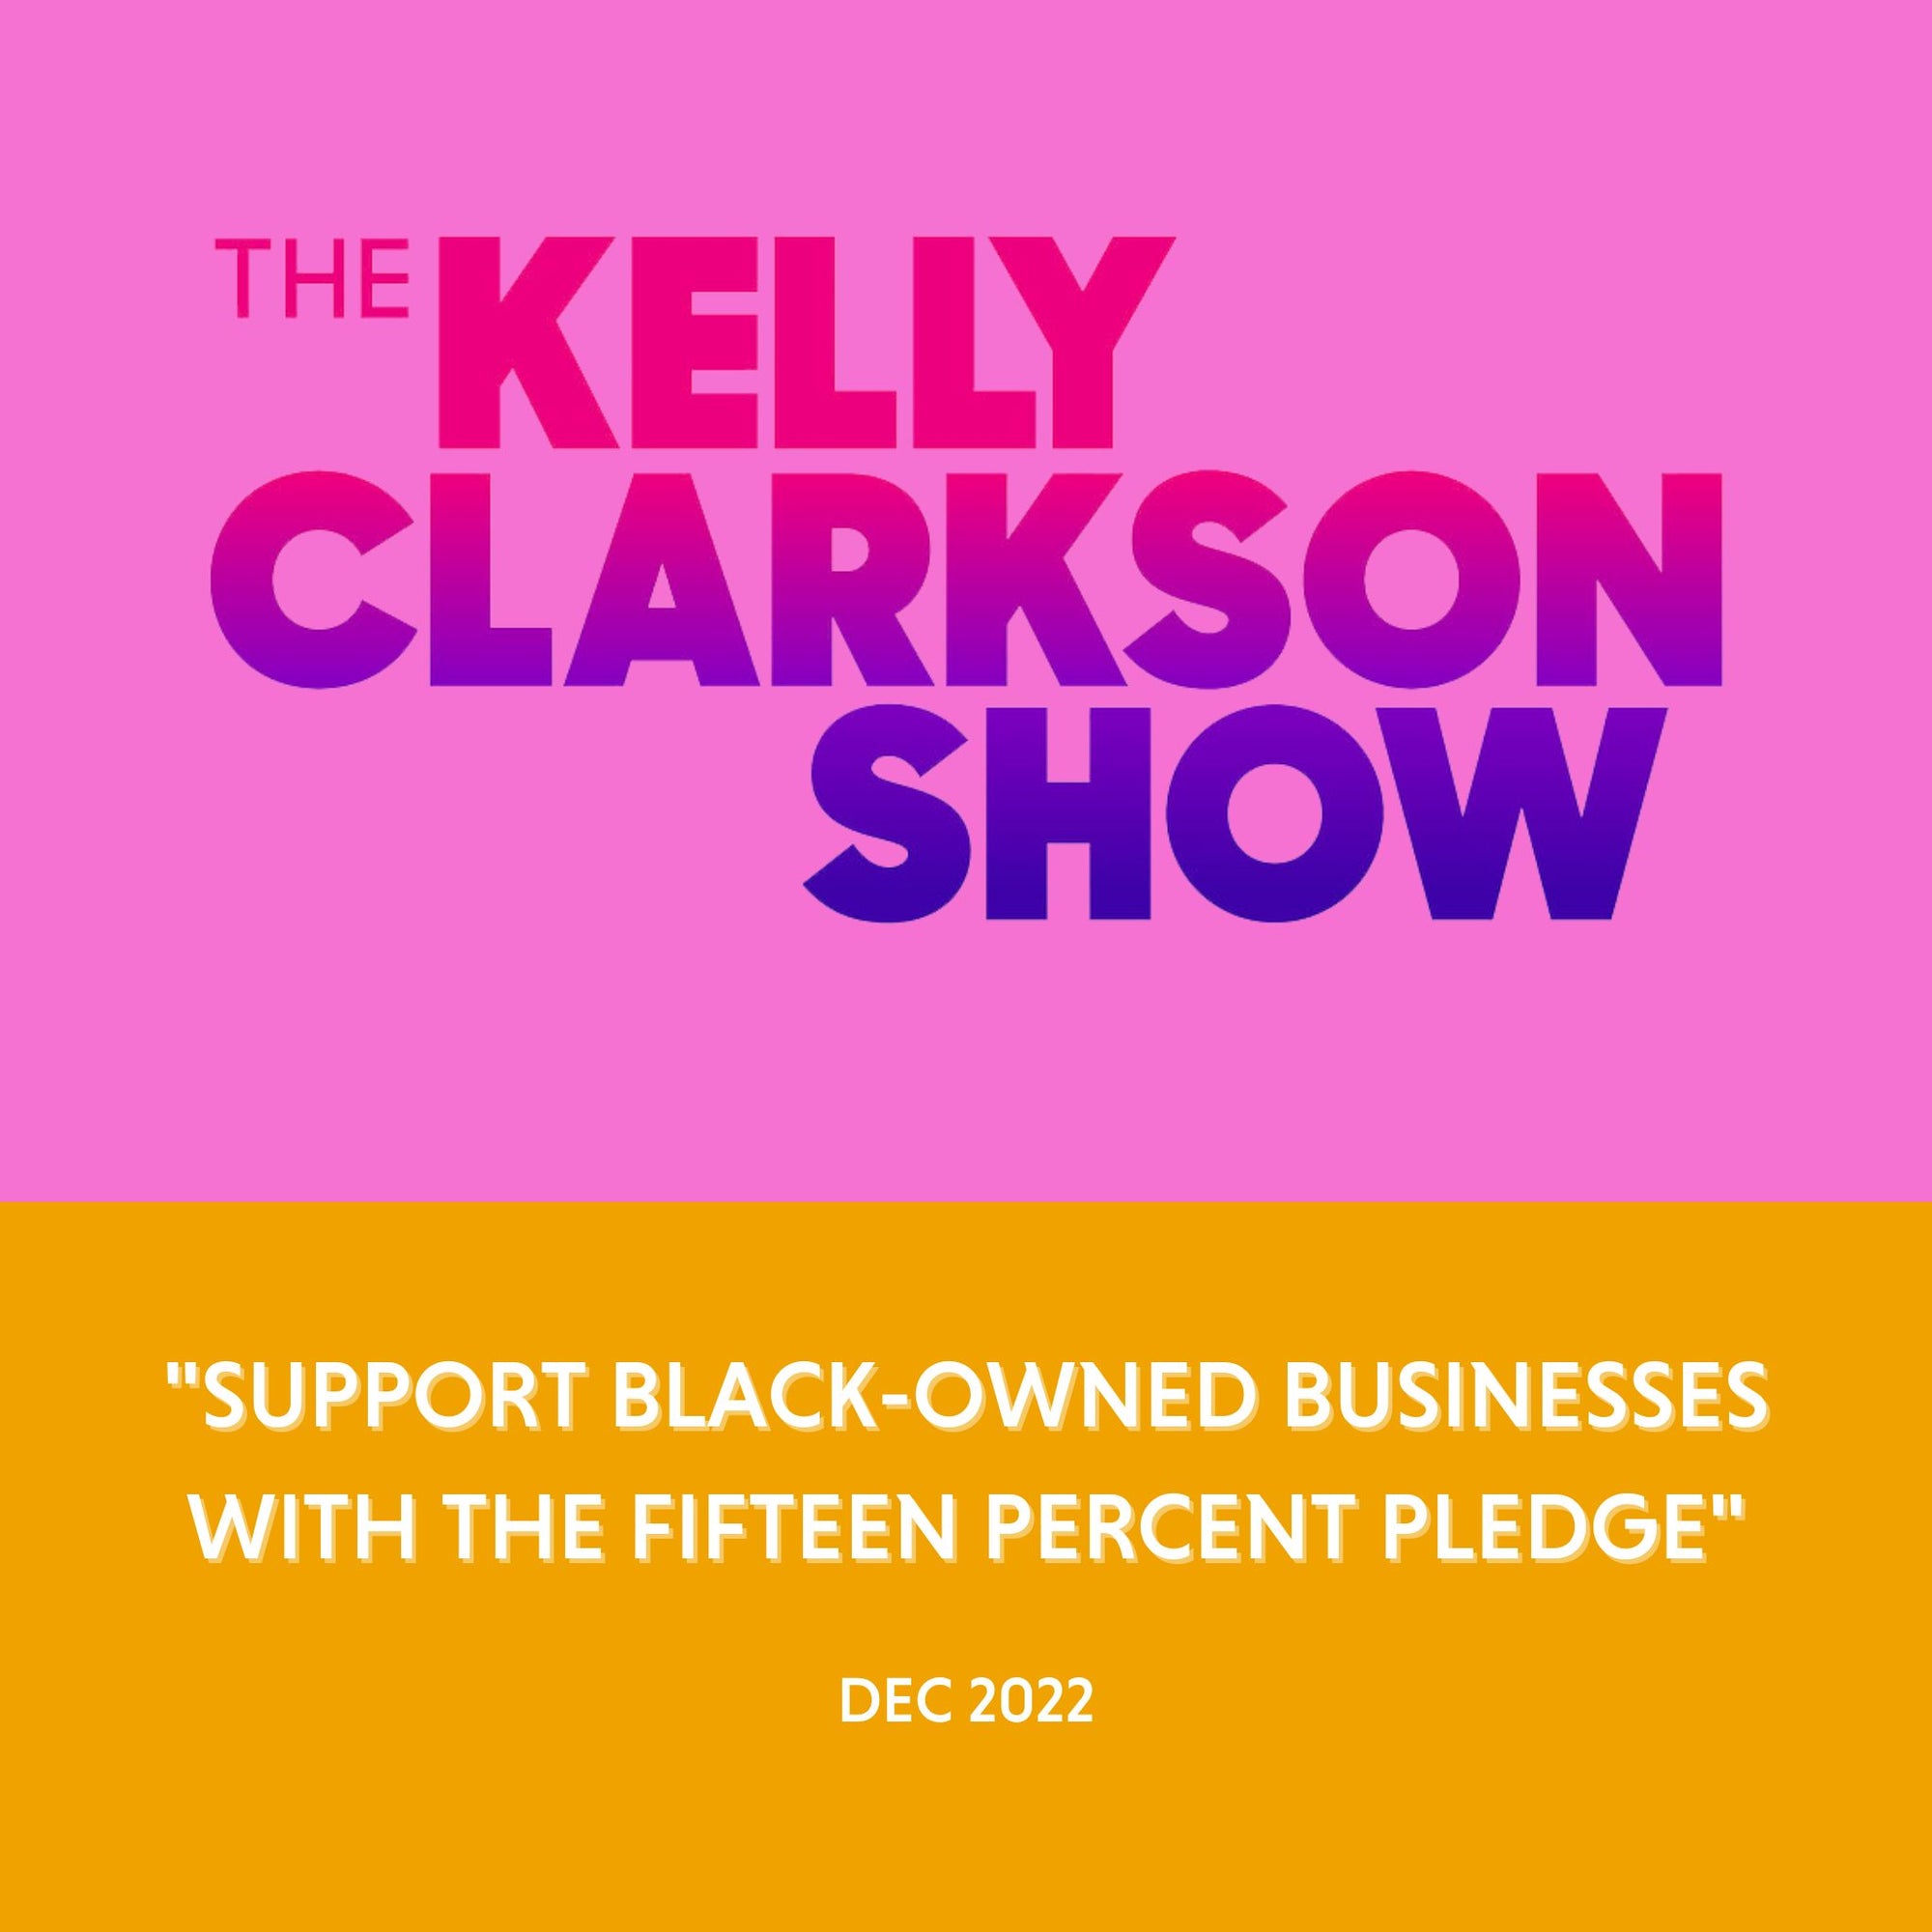 The Kelly Clarkson Show - "Support Black-Owned Businesses With The Fifteen Percent Pledge" Dec 2022